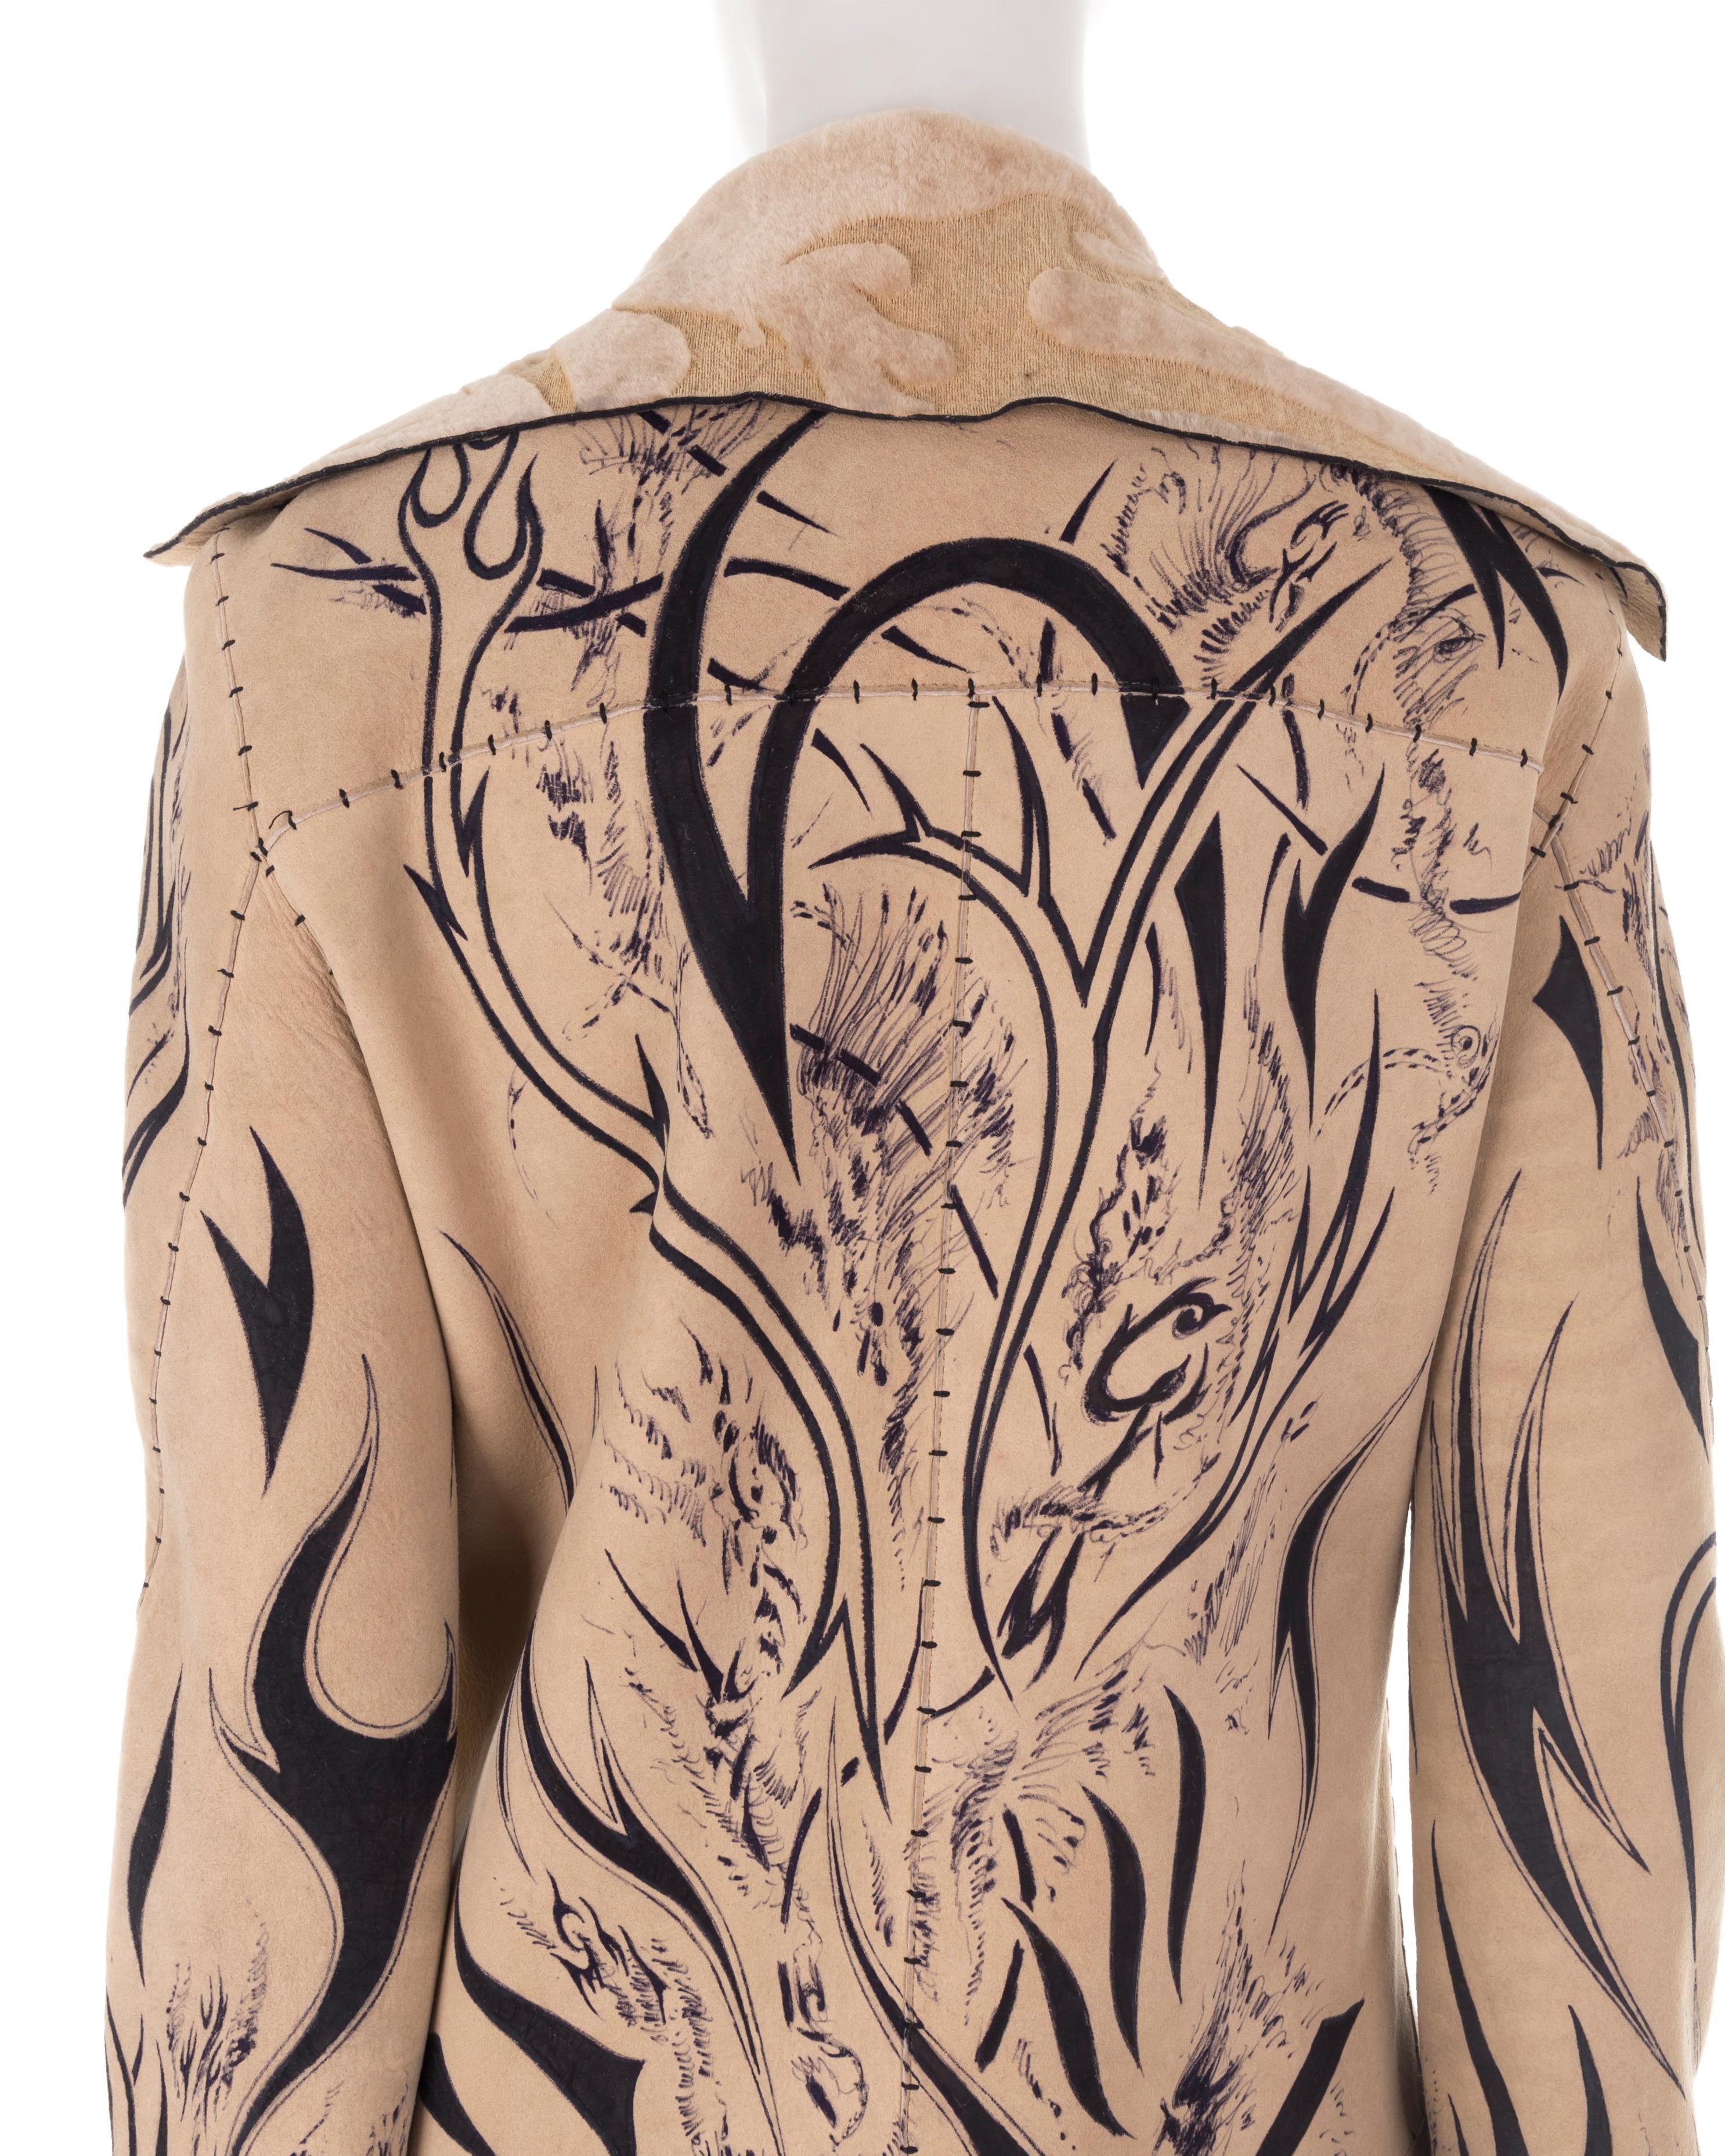 Roberto Cavalli F/W 1999 runway sample hand-painted leather jacket and skirt set For Sale 3